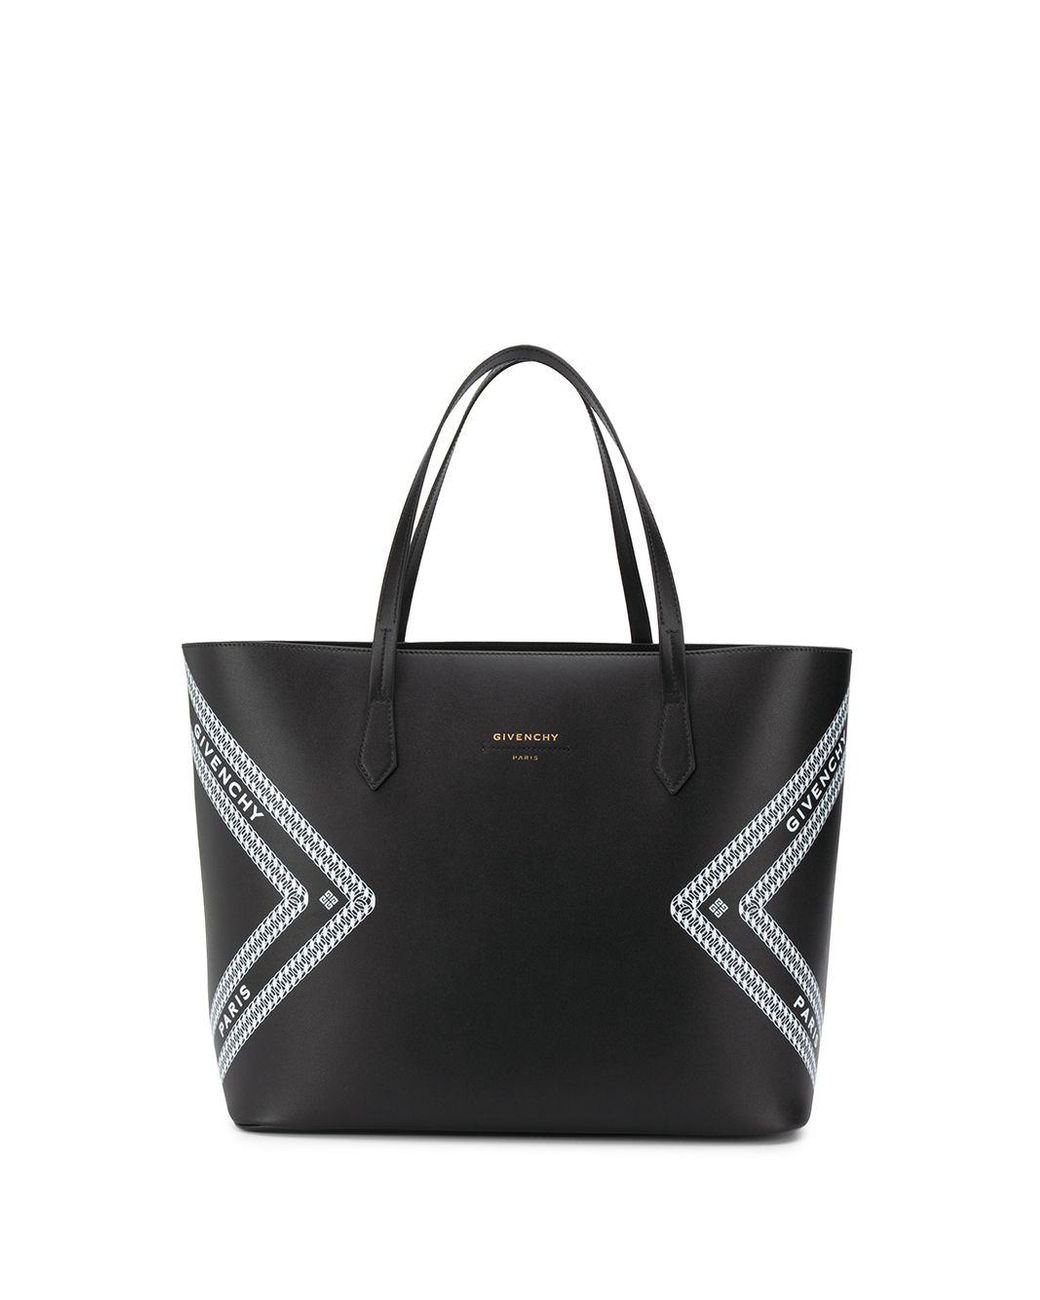 Givenchy Leather Wing Shopping Bag in White/Black (Black) | Lyst